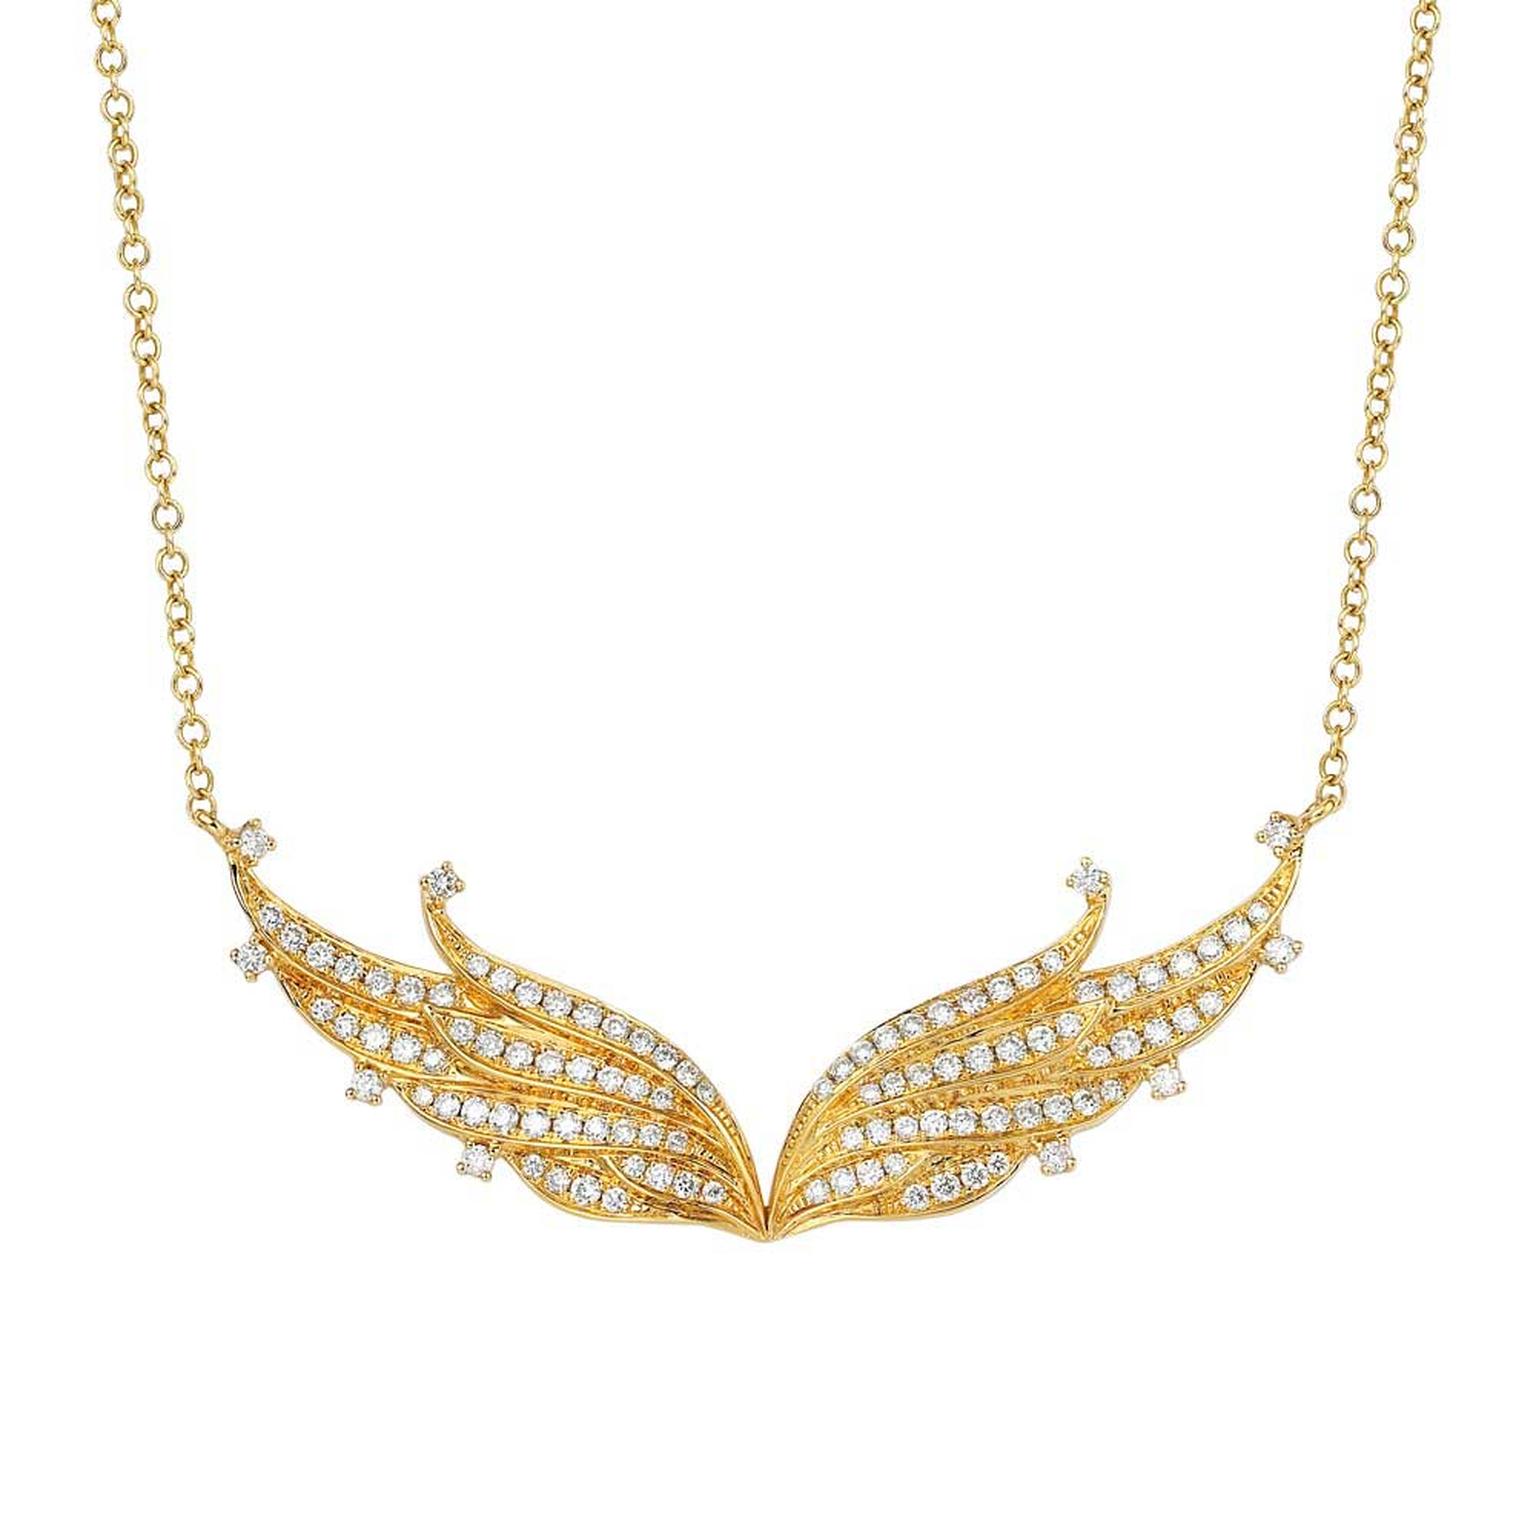 Sarah Zhuang yellow gold and diamond Angel necklace